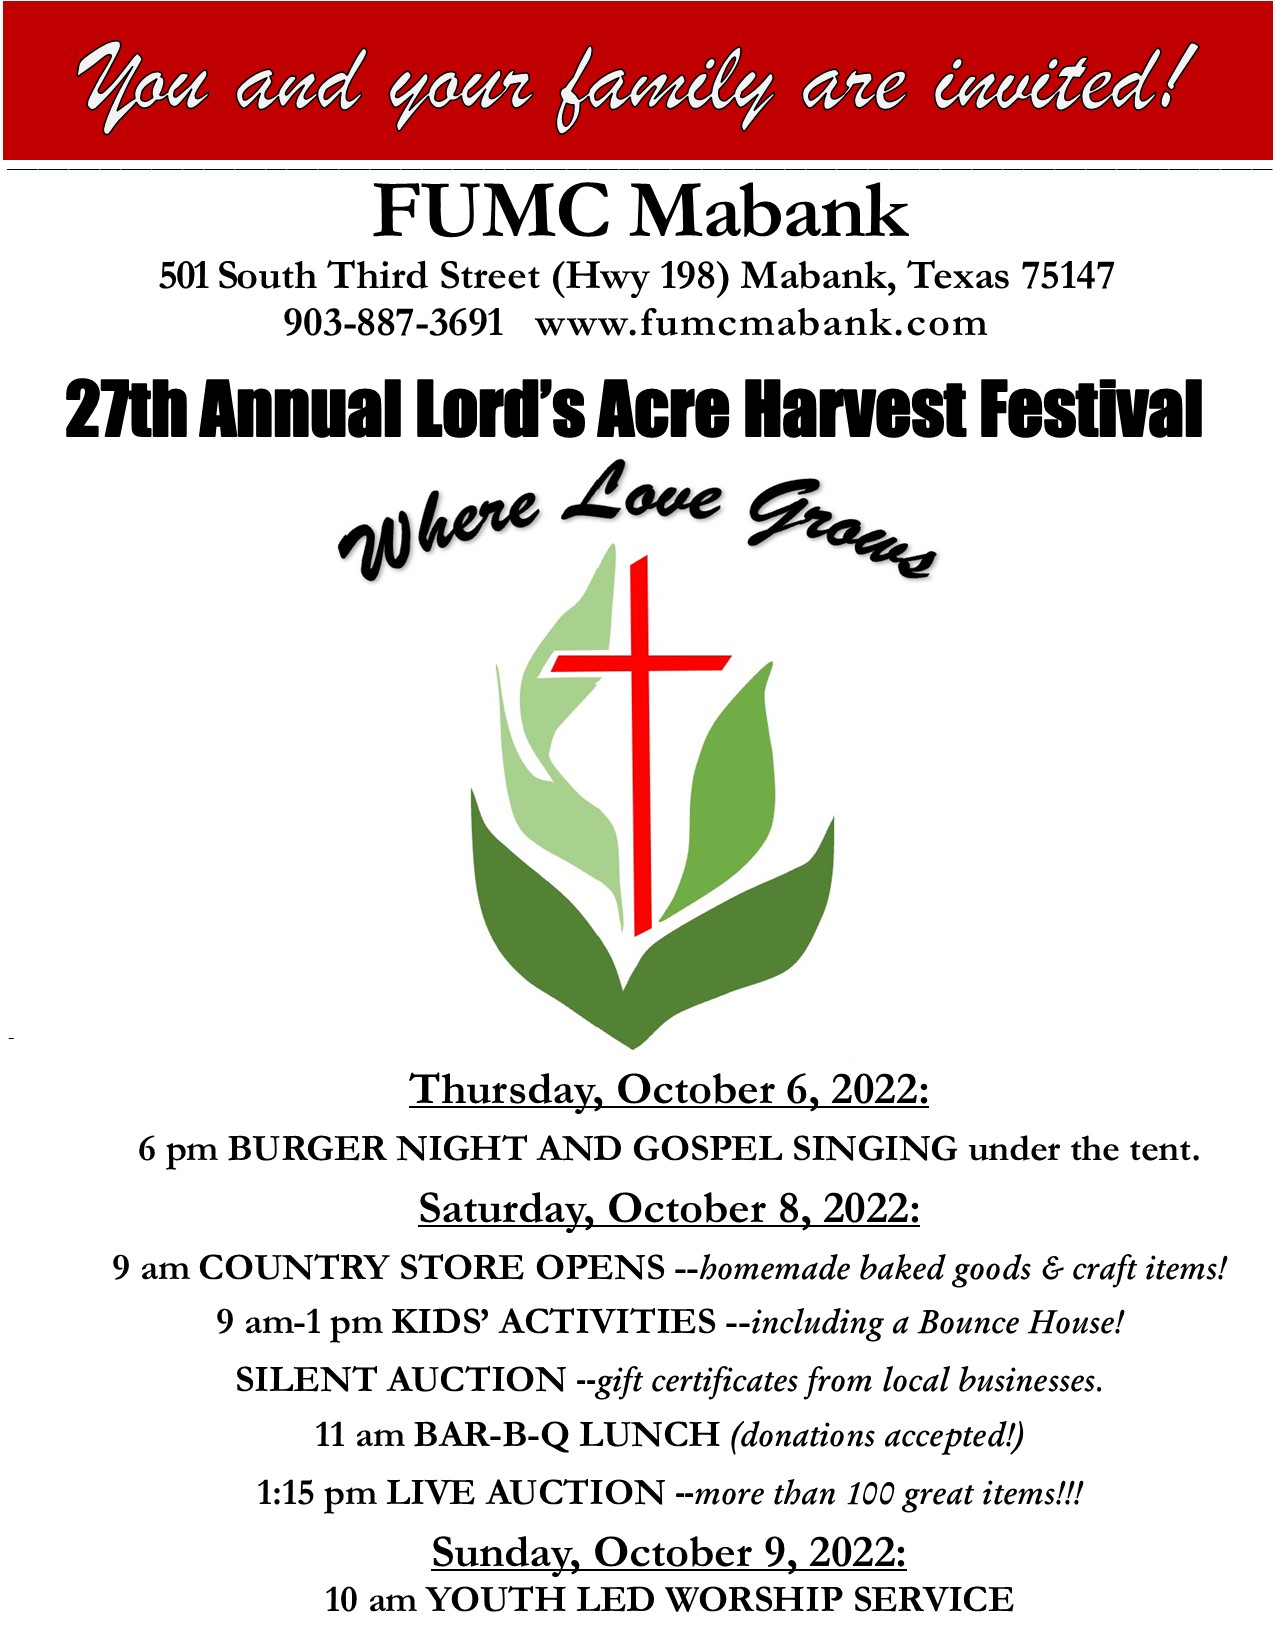 27th Annual Lord's Acre Harvest Festival 1 lords acres CedarCreekLake.Online